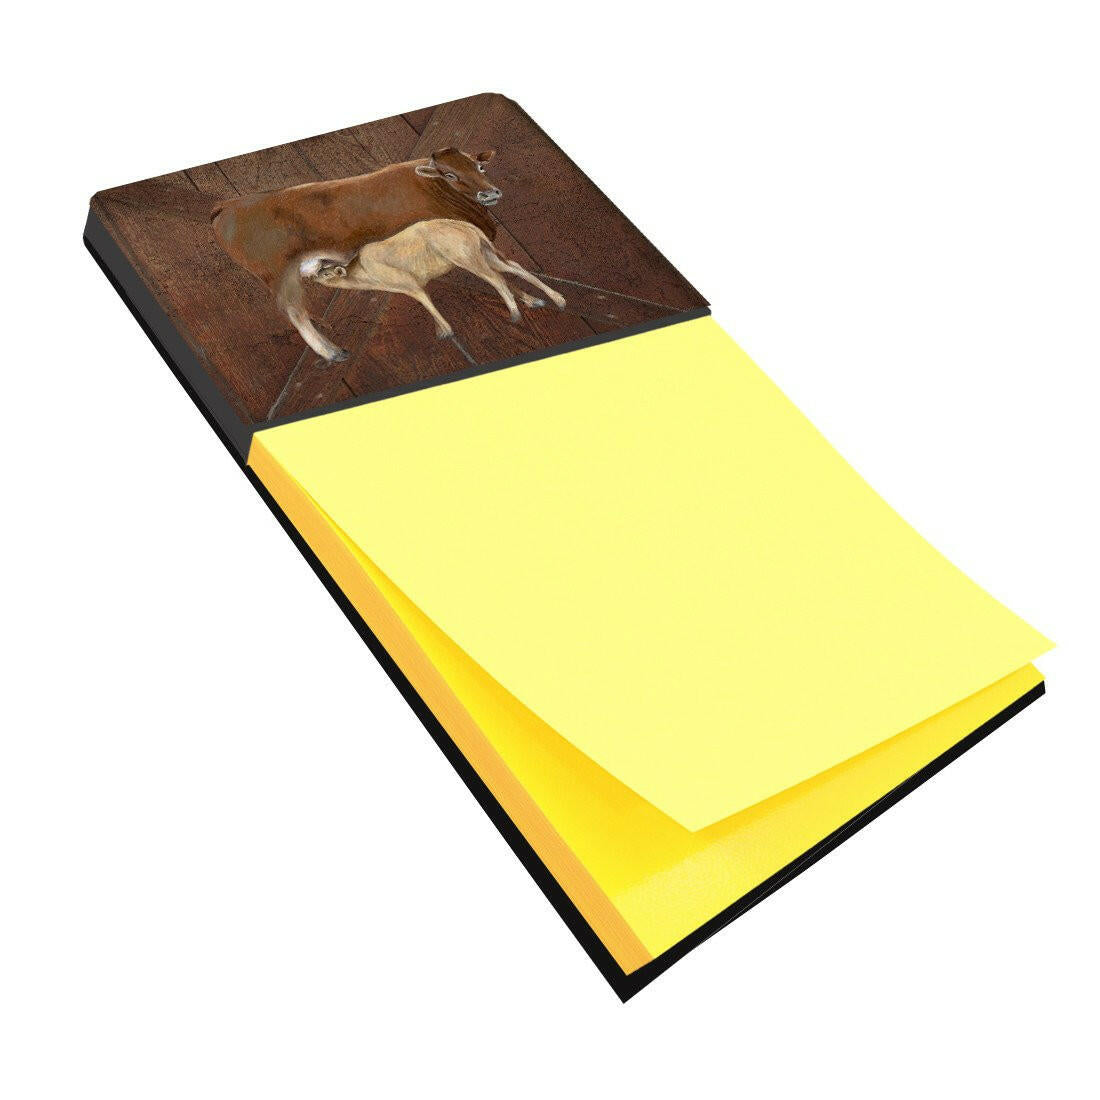 Cow Momma and Baby Refiillable Sticky Note Holder or Postit Note Dispenser SB3074SN by Caroline's Treasures